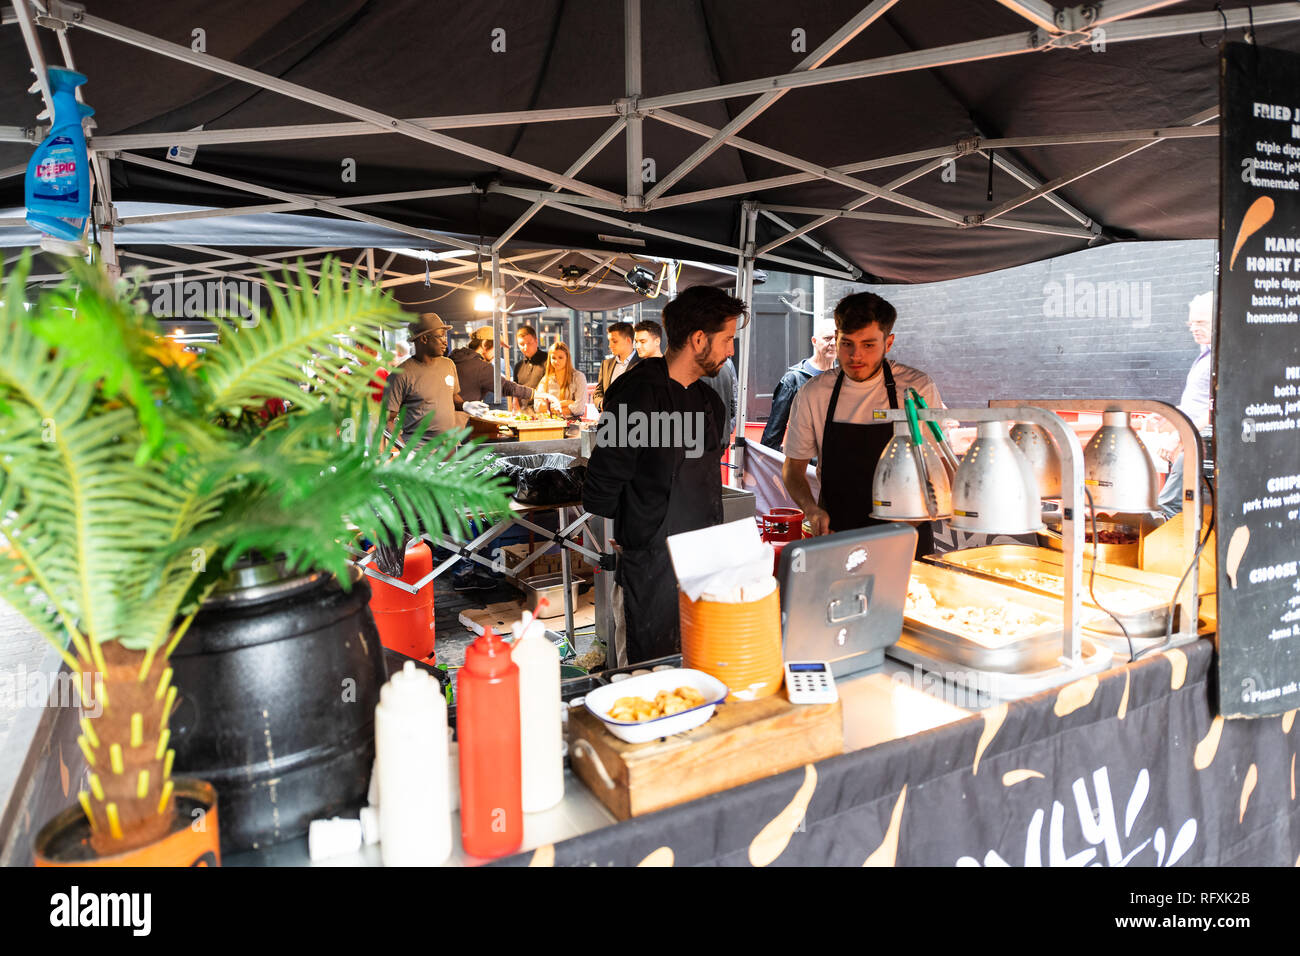 London, UK - September 12, 2018: Famous Brewer Market Street Food Union culture in Soho and people preparing fast food Stock Photo